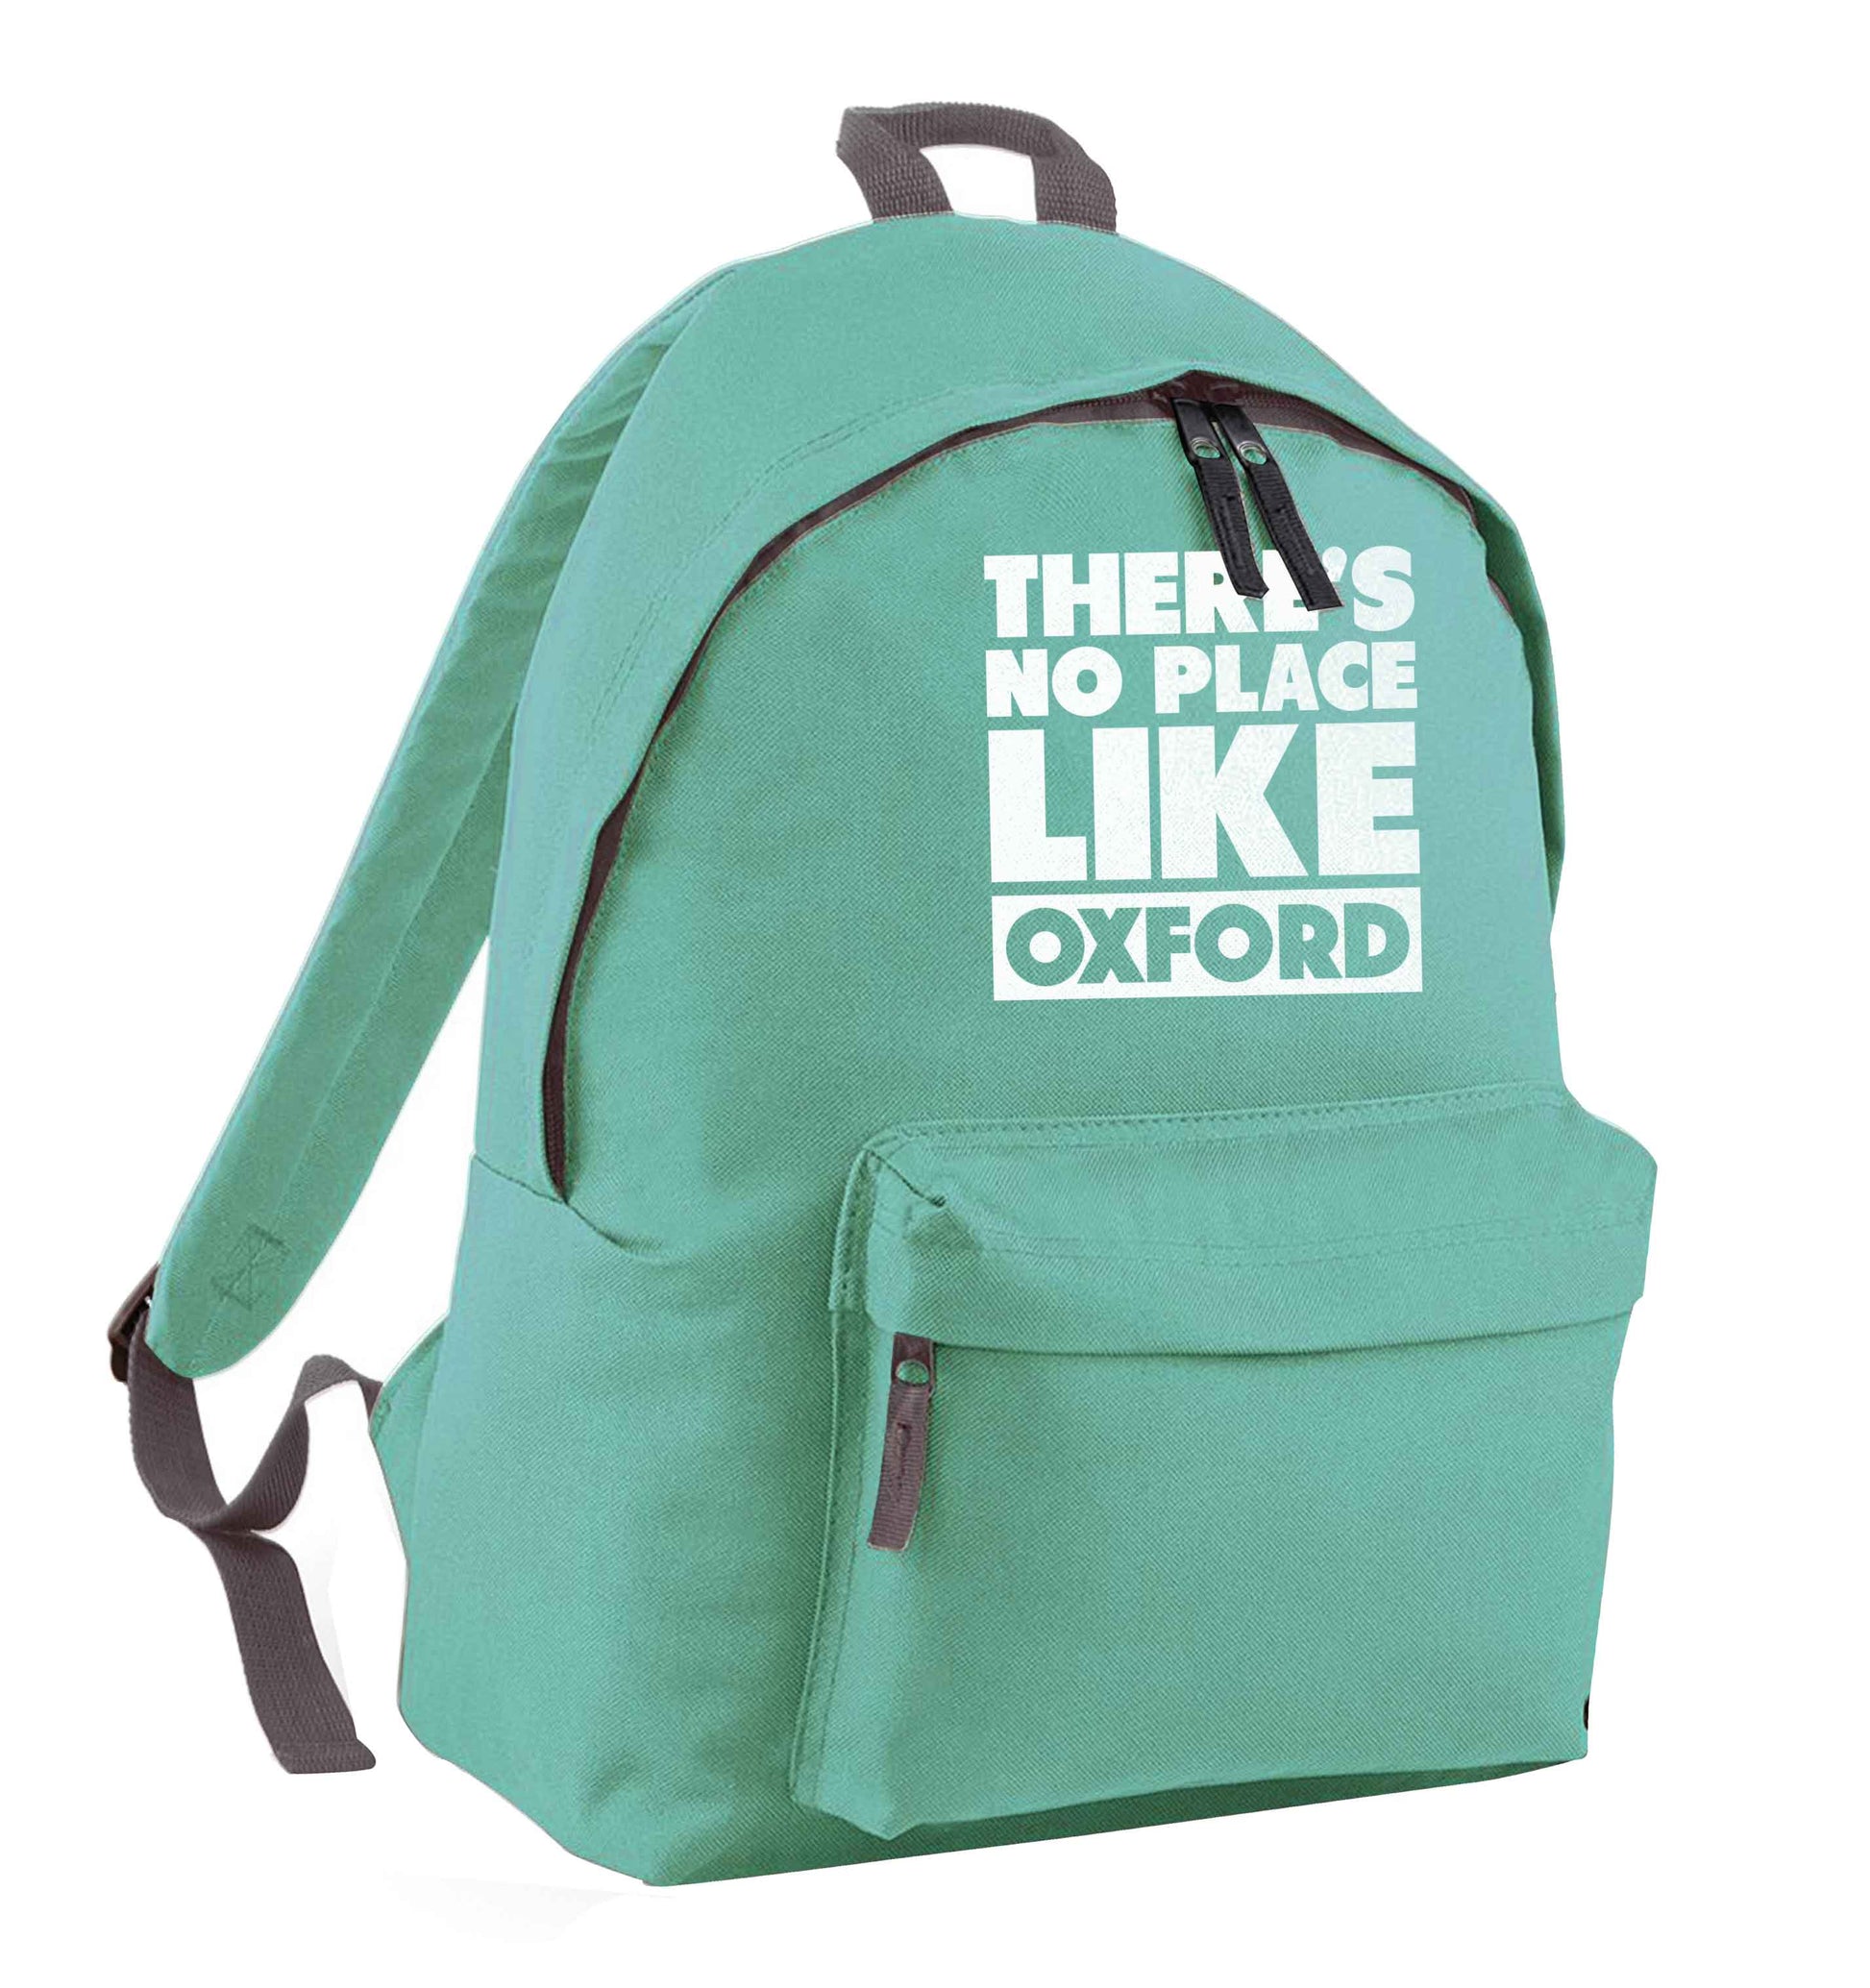 There's no place like Oxford mint adults backpack